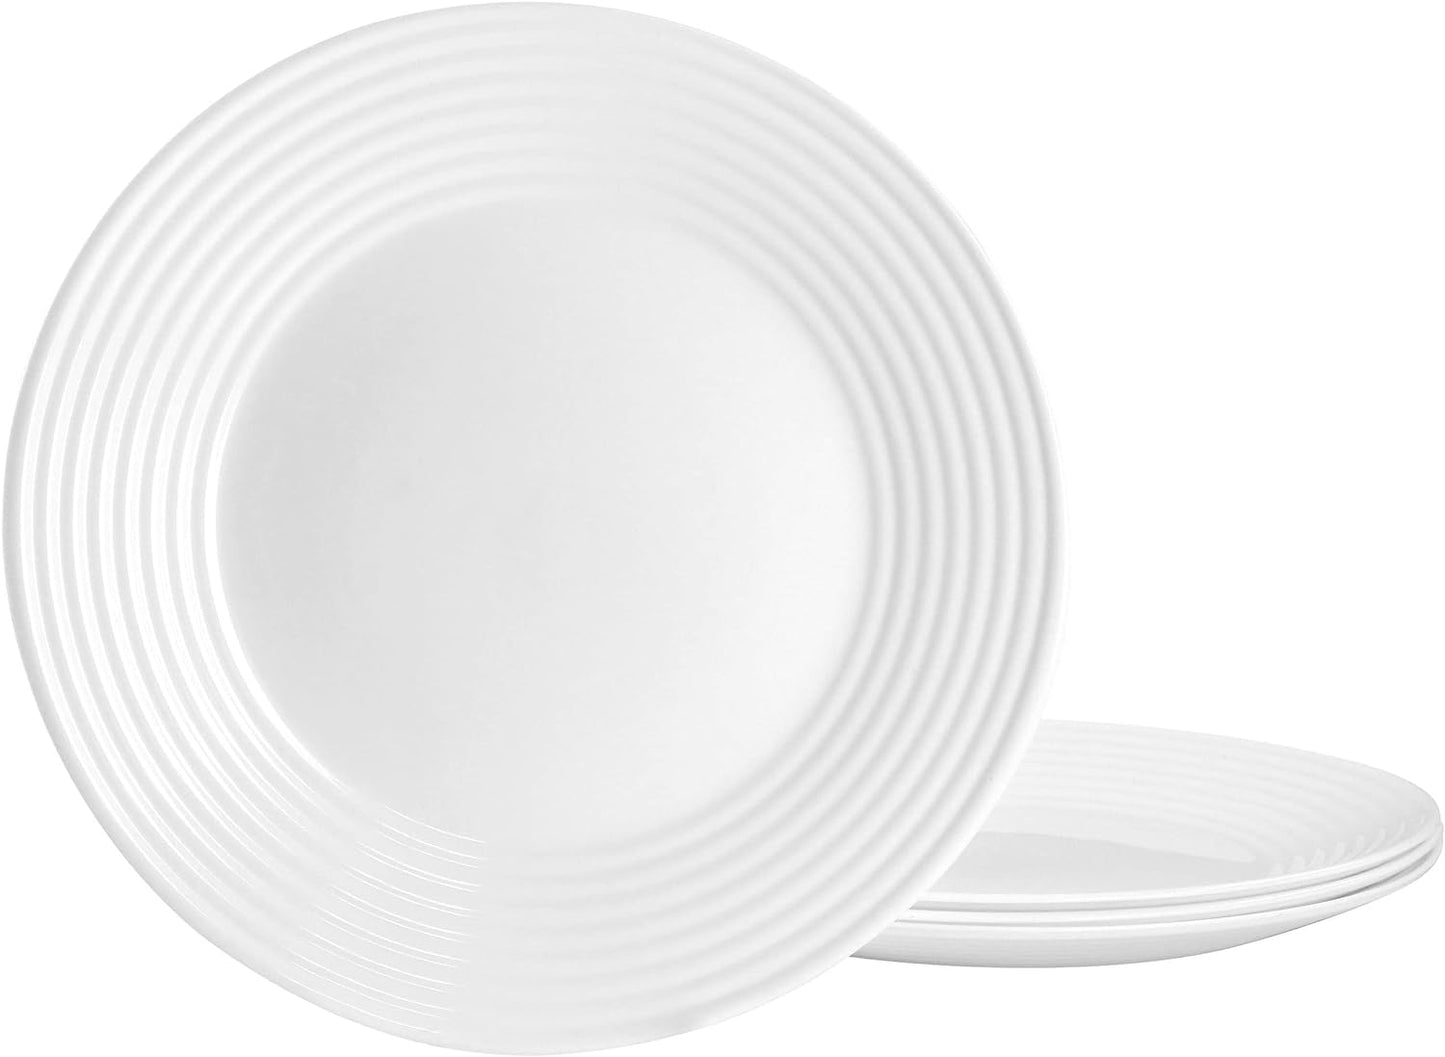 4 PC Gibson White Tempered Opal Glass Dinner Plate Set